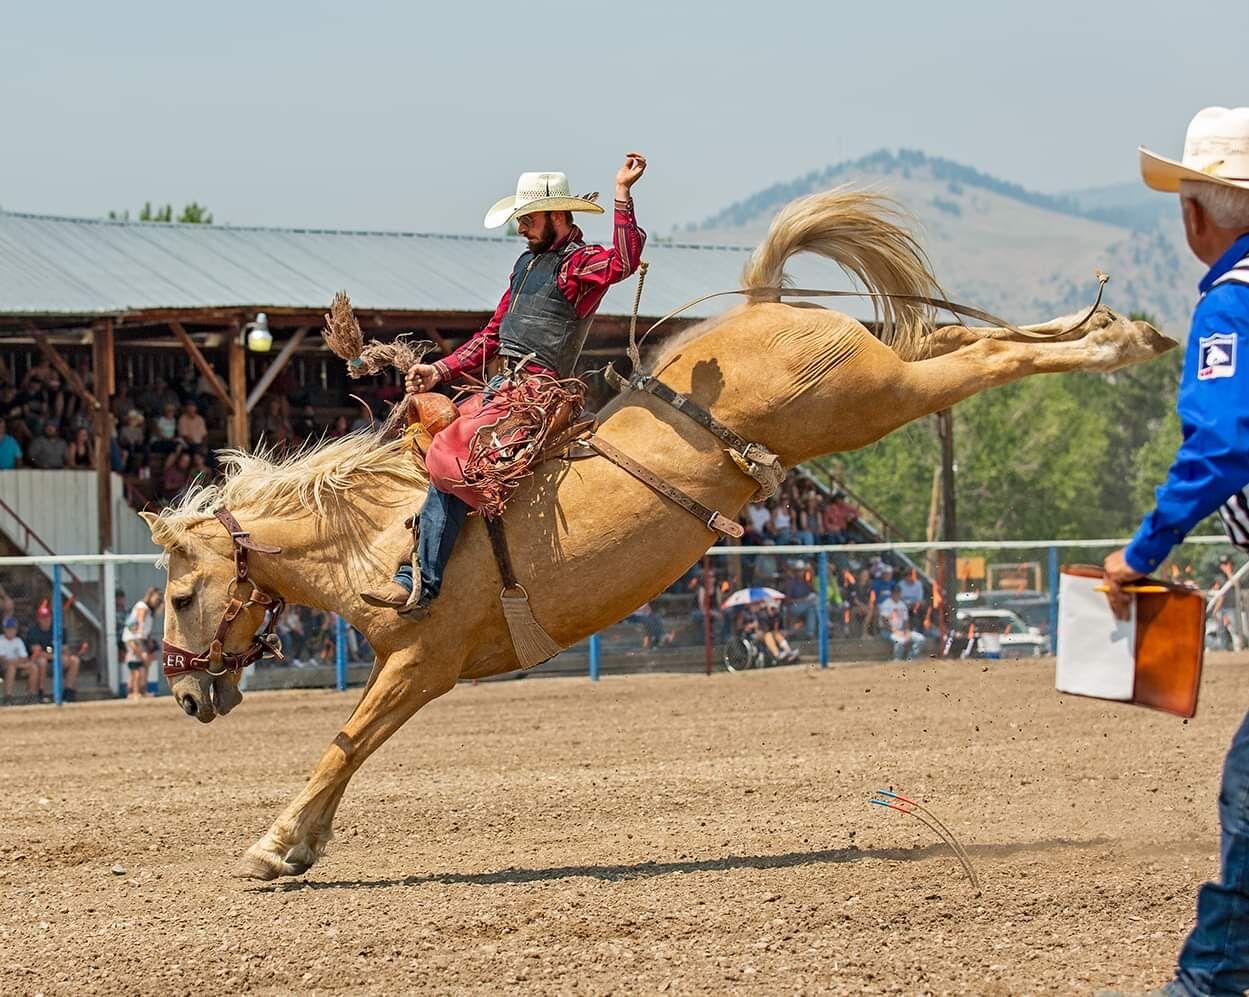 Montana Pro Rodeo Circuit Finals returns to Four Seasons Arena in 2022